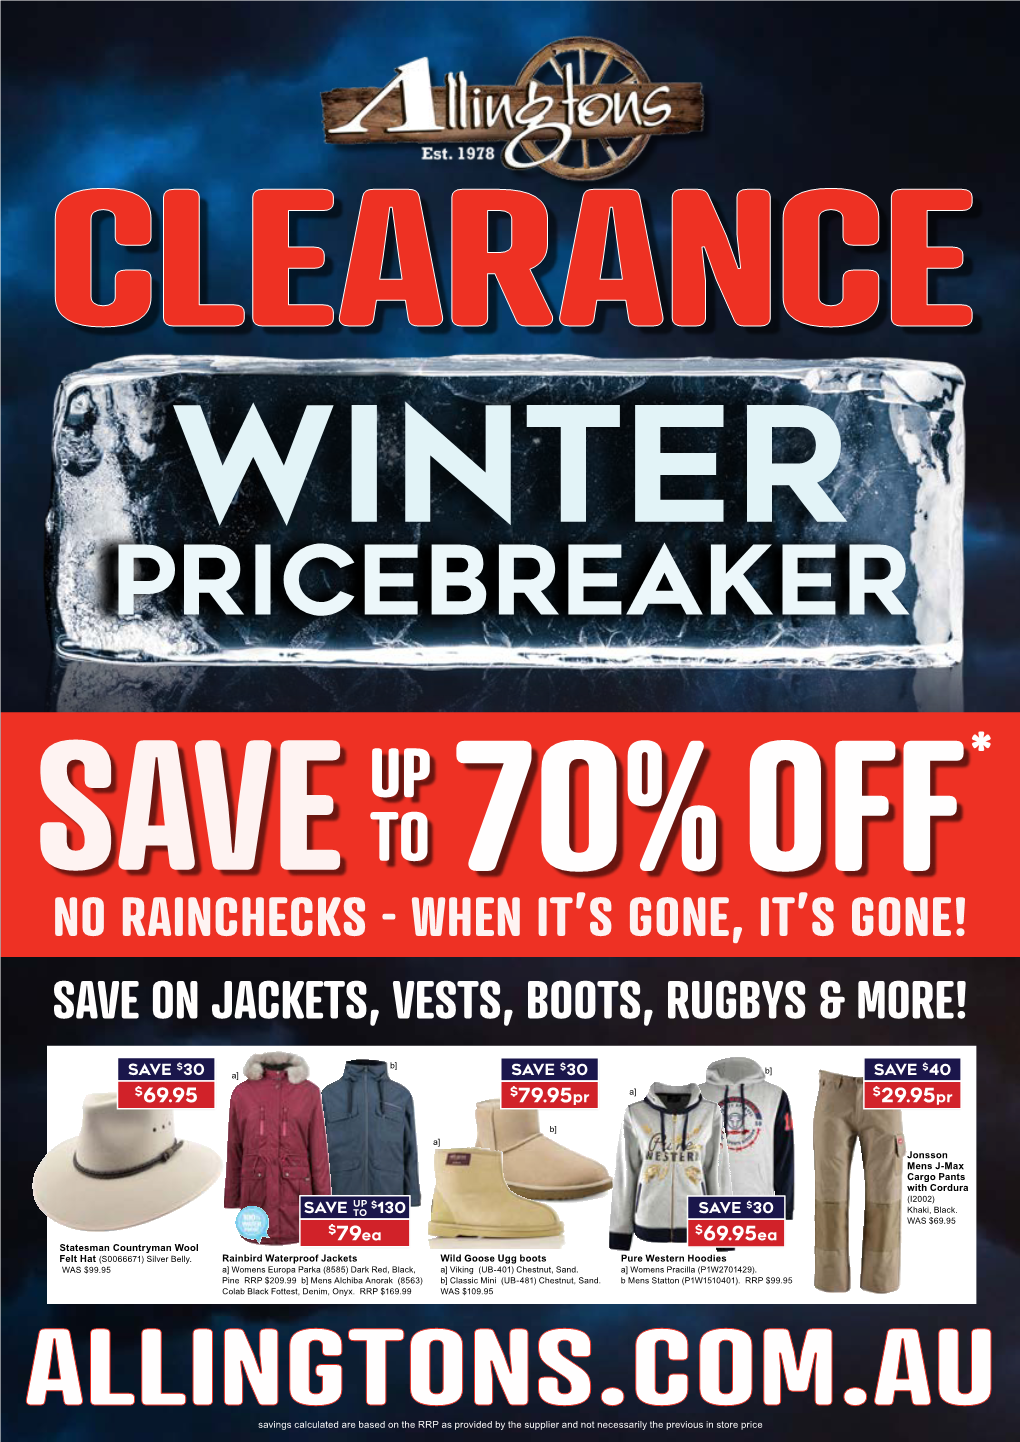 No Rainchecks - When It’S Gone, It’S Gone! Save on Jackets, Vests, Boots, Rugbys & More!